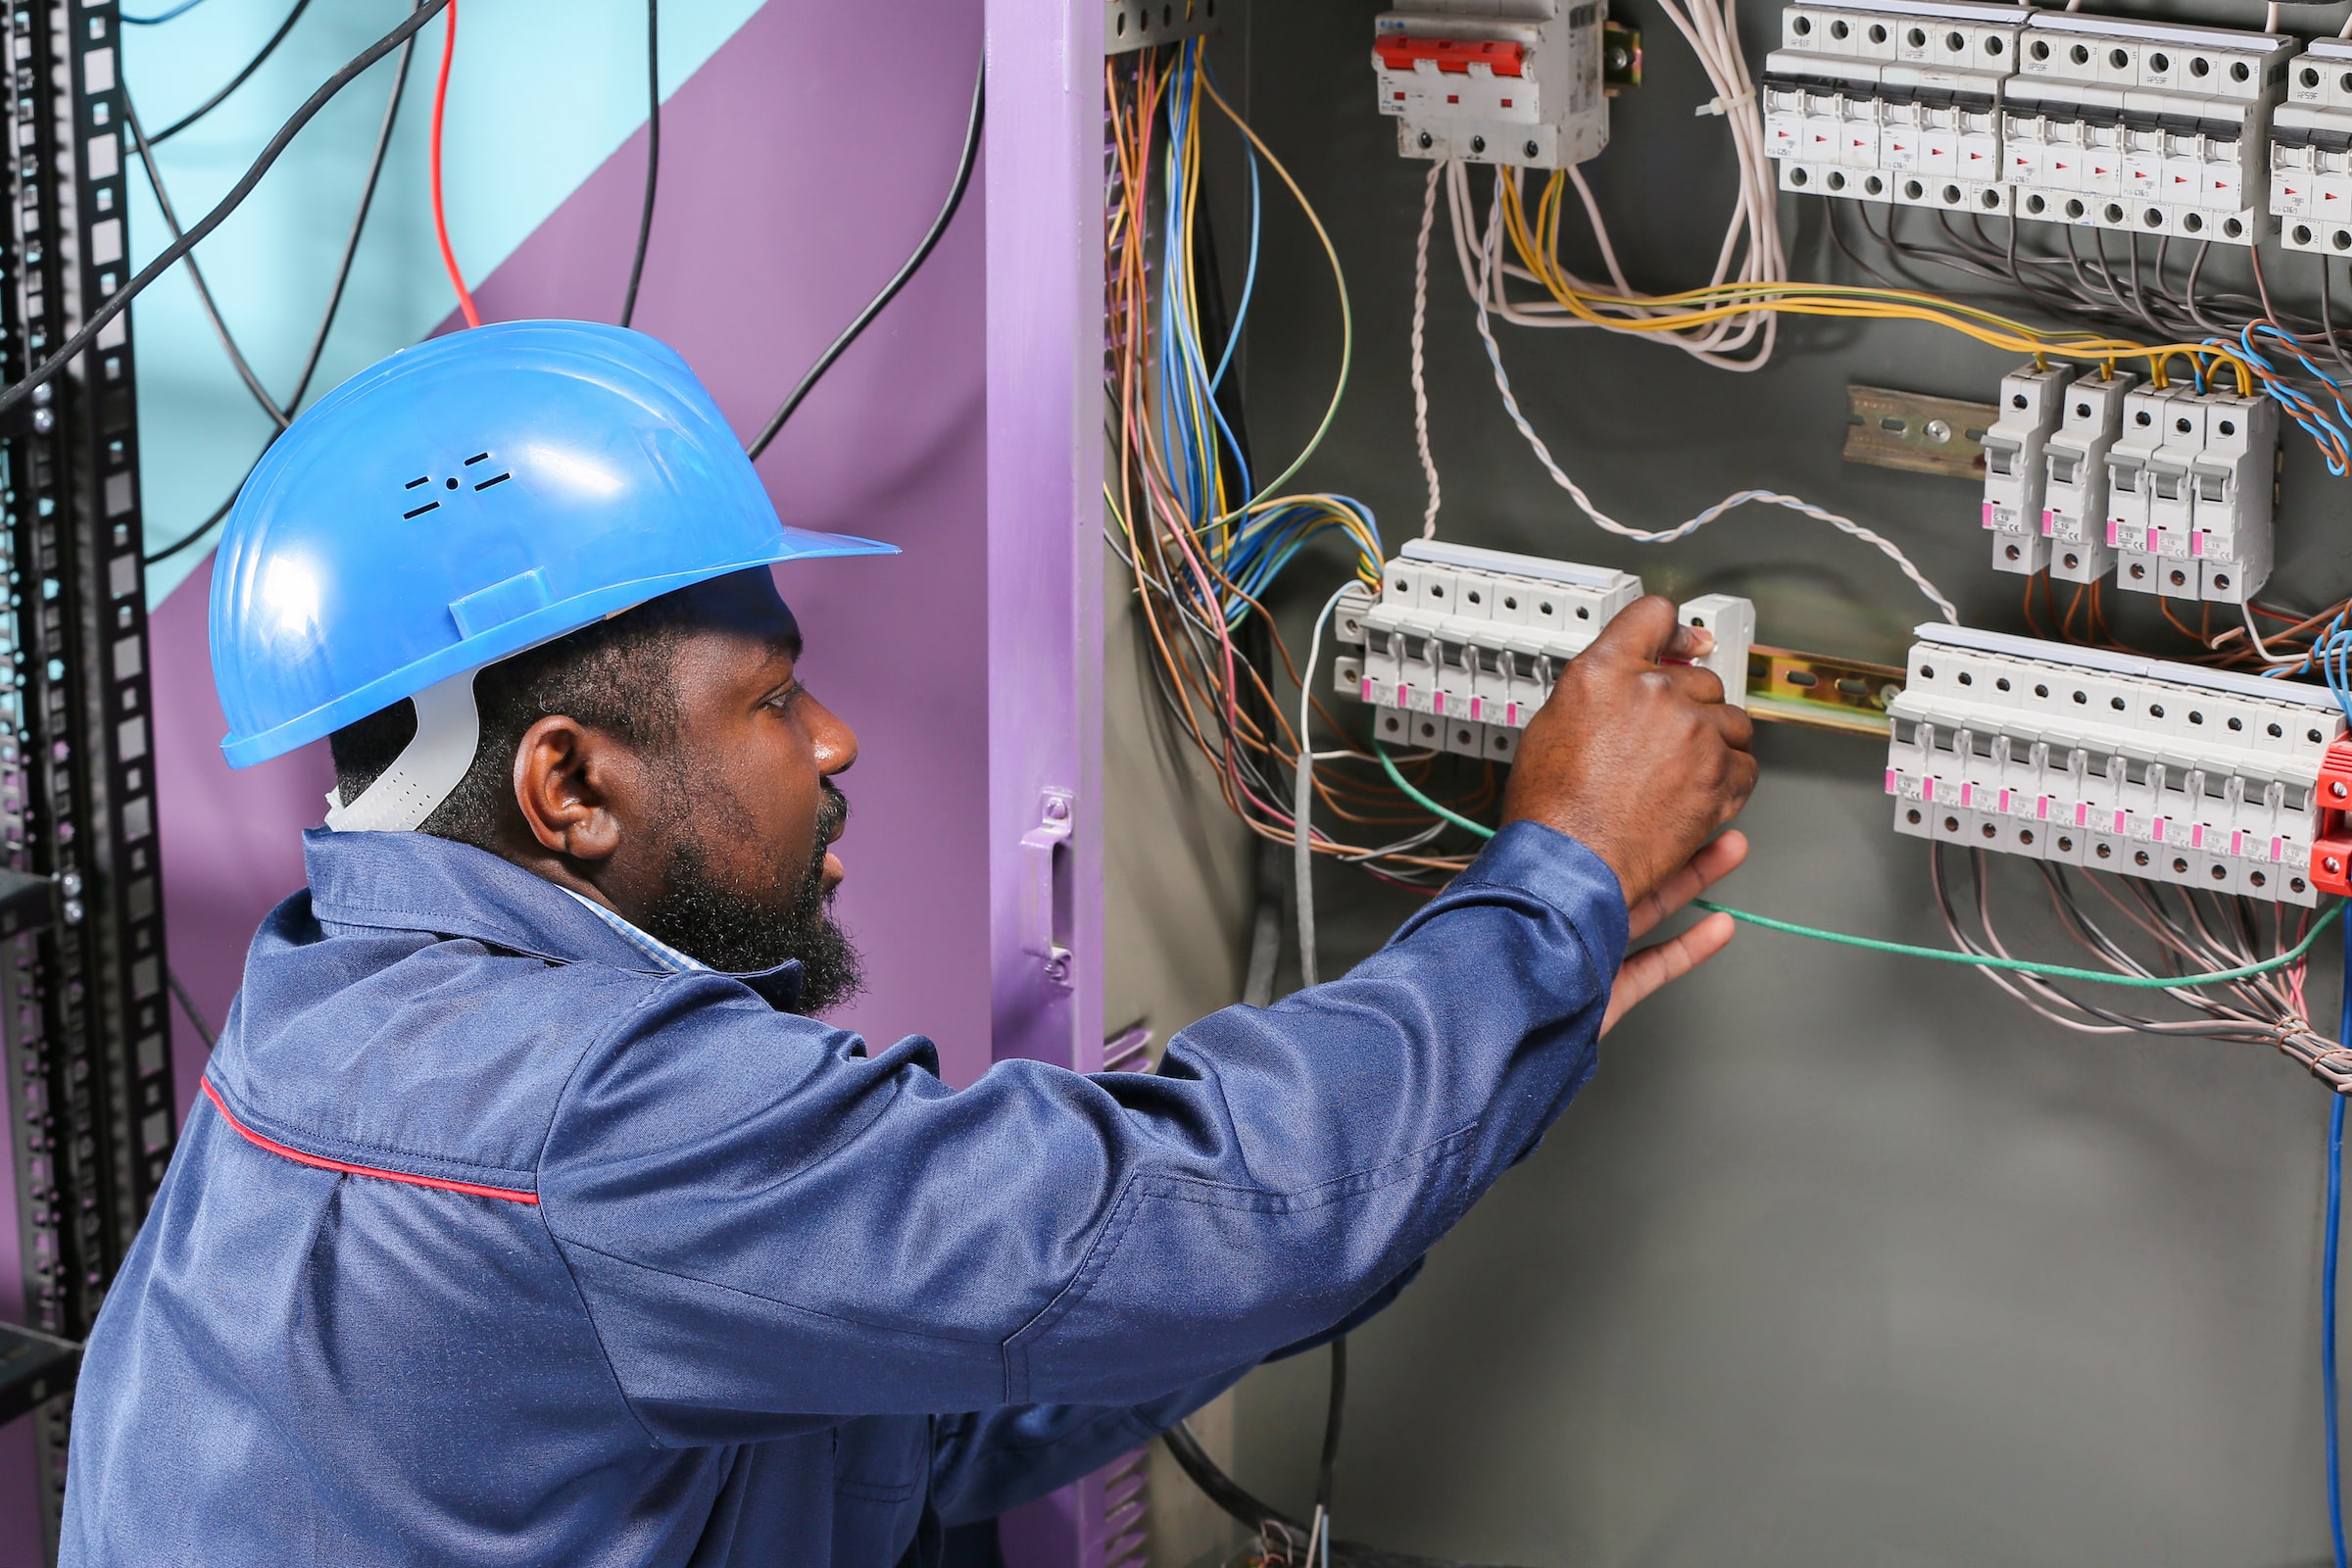 Man working on electrical fuses